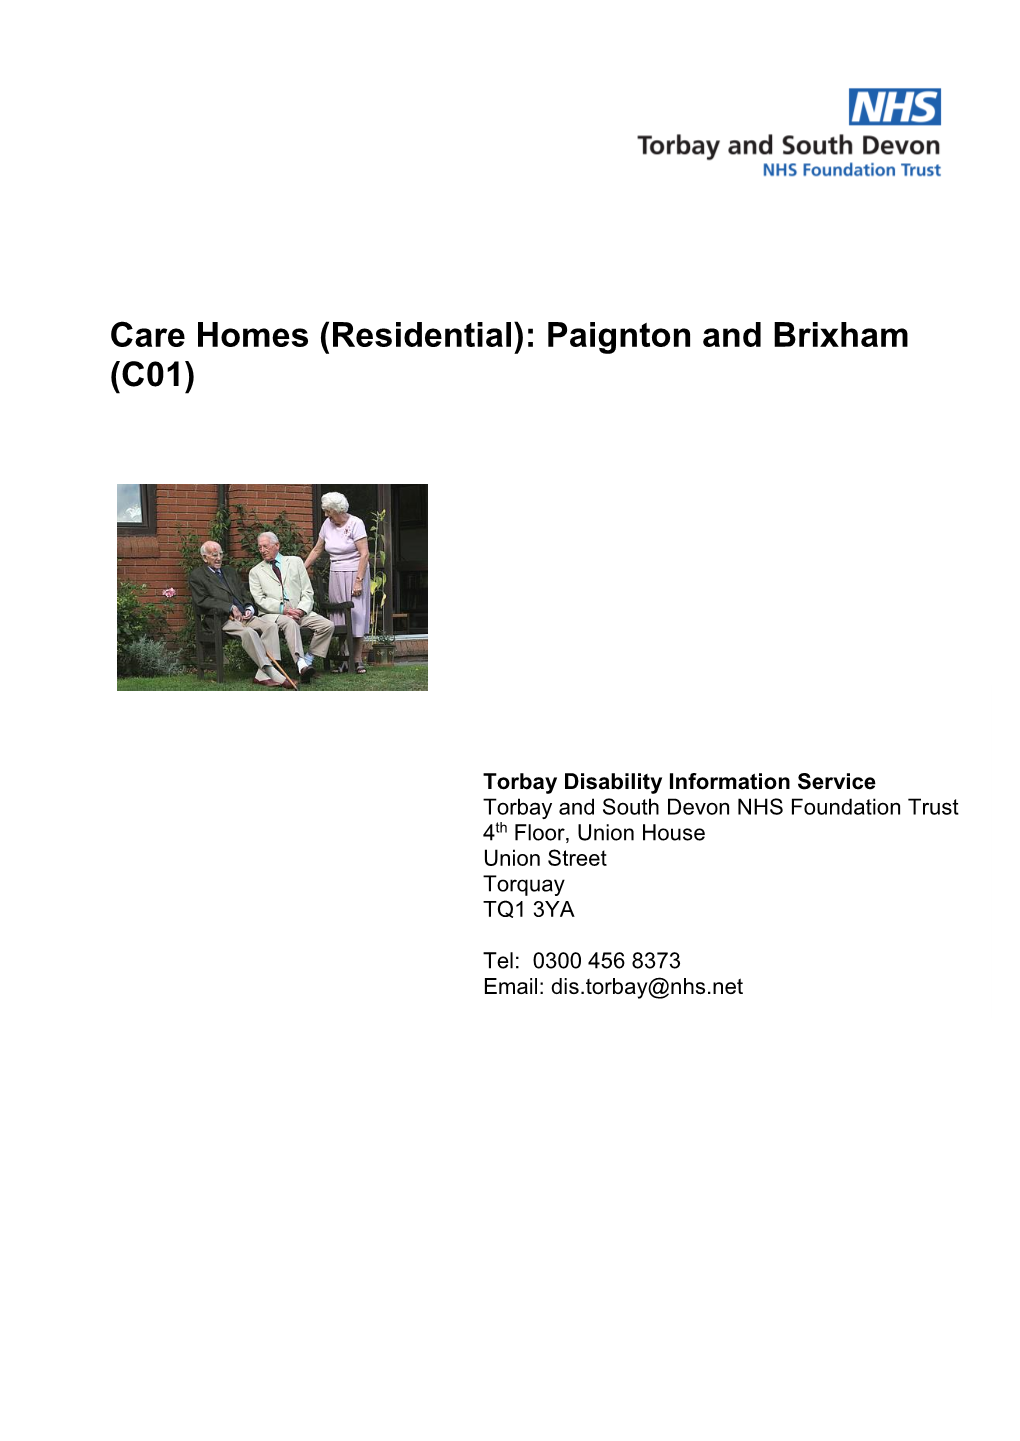 Care Homes (Residential): Paignton and Brixham (C01)